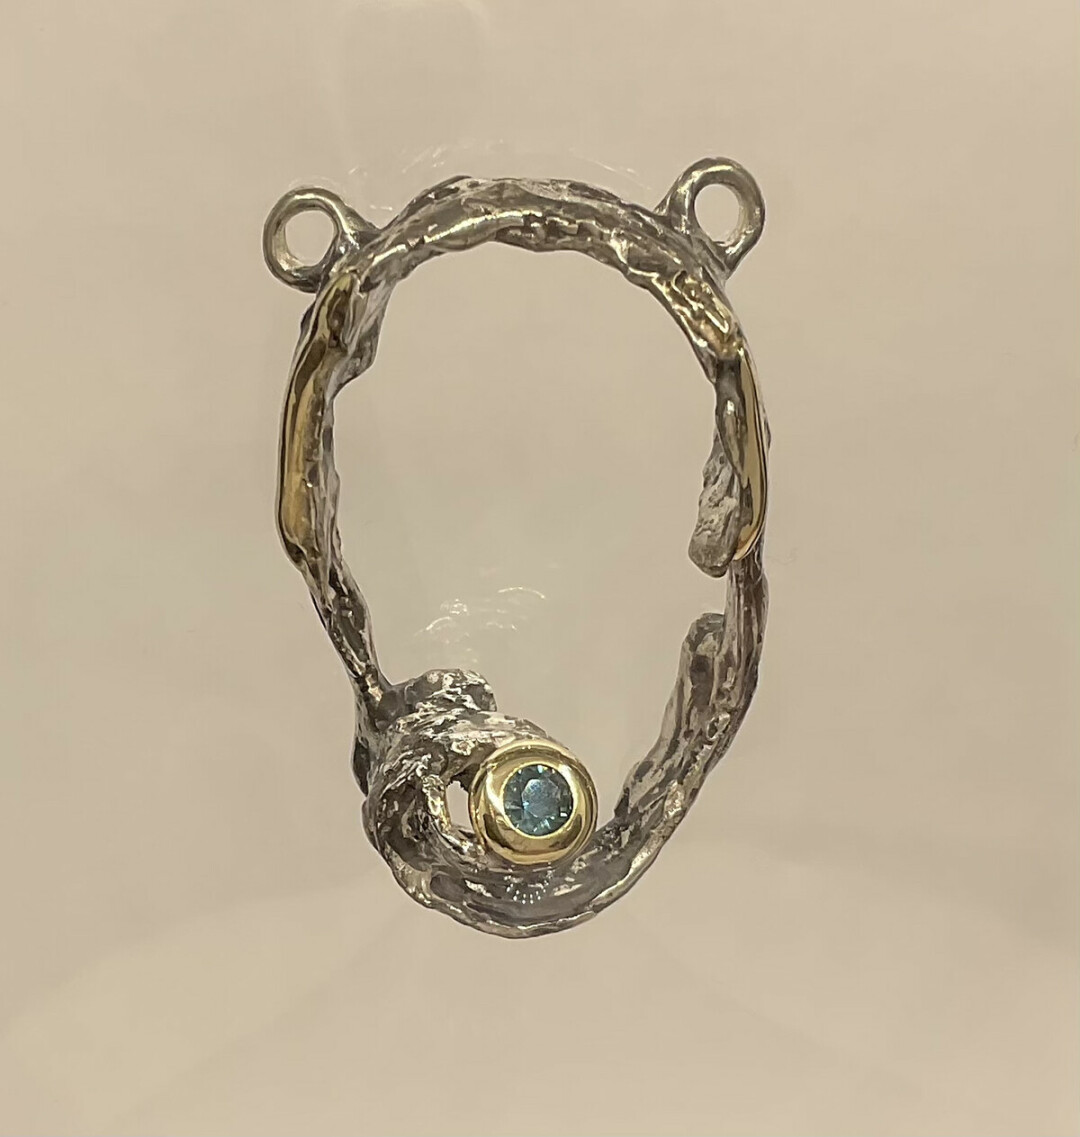 Metalsmith Liz created a Bird’s Nest with a Robin’s Egg Blue Sapphire for the March 2022 show. This Birch Bark pendant is composed of sterling silver, 14K yellow gold and has a genuine round sapphire. 